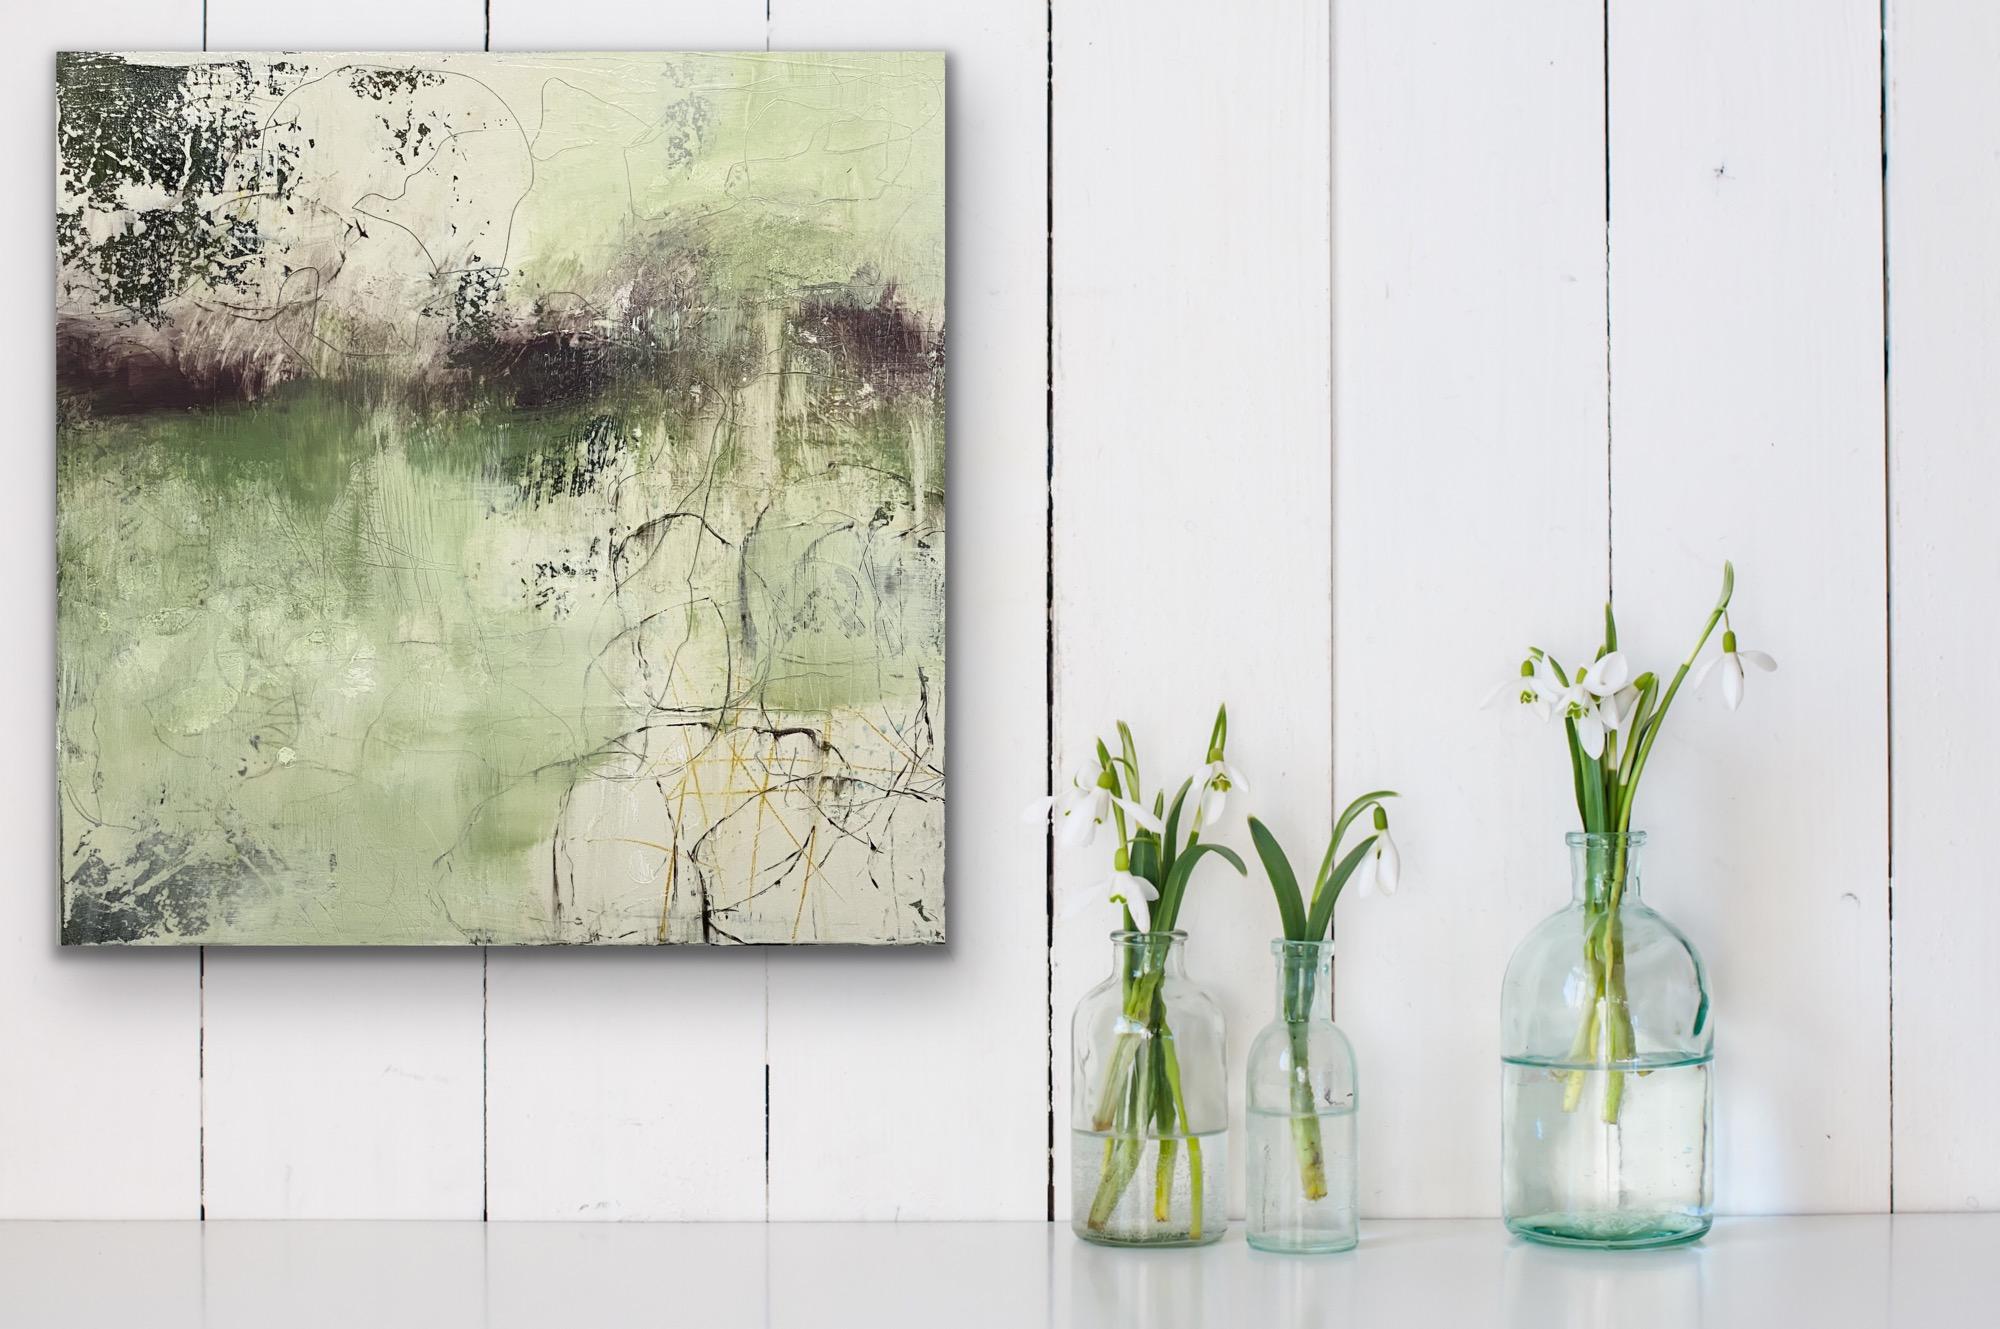 Breeze, Contemporary landscape, light green, 2020, Acrylic on canvas - Beige Abstract Painting by Juanita Bellavance 